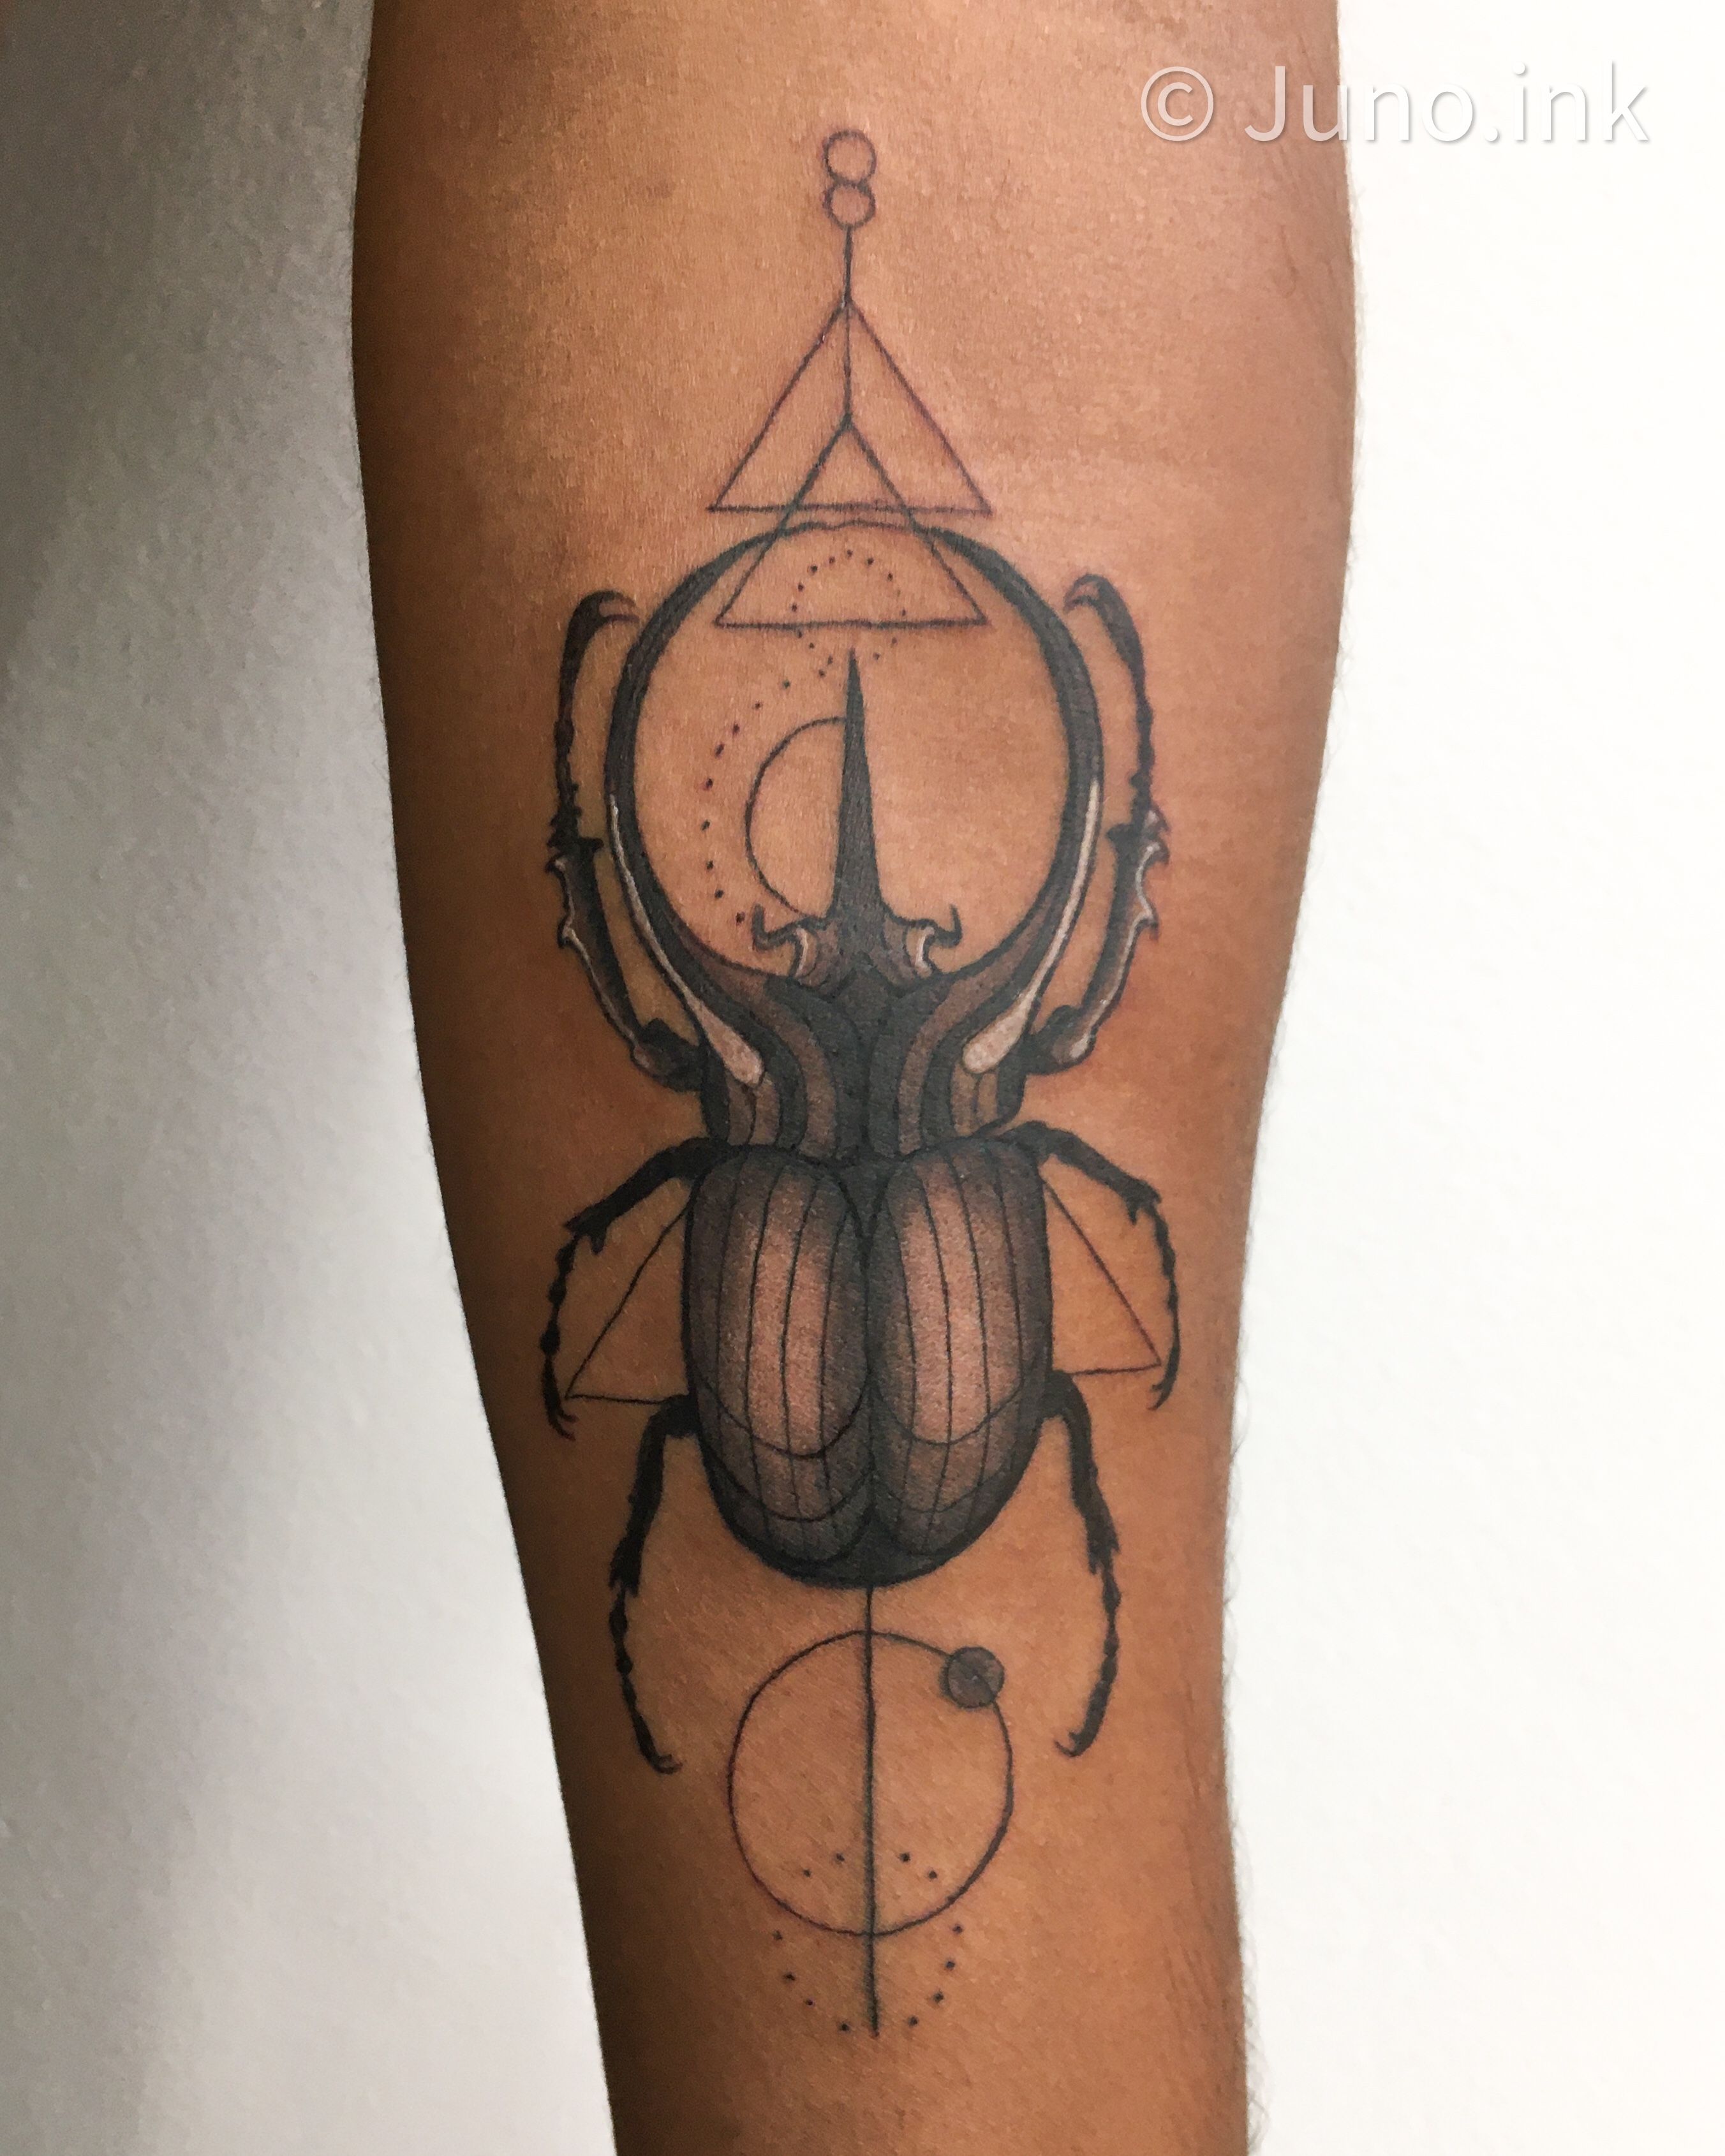 Finished up this unfolding stag beetle This was her first tattoo and    58K Views  TikTok